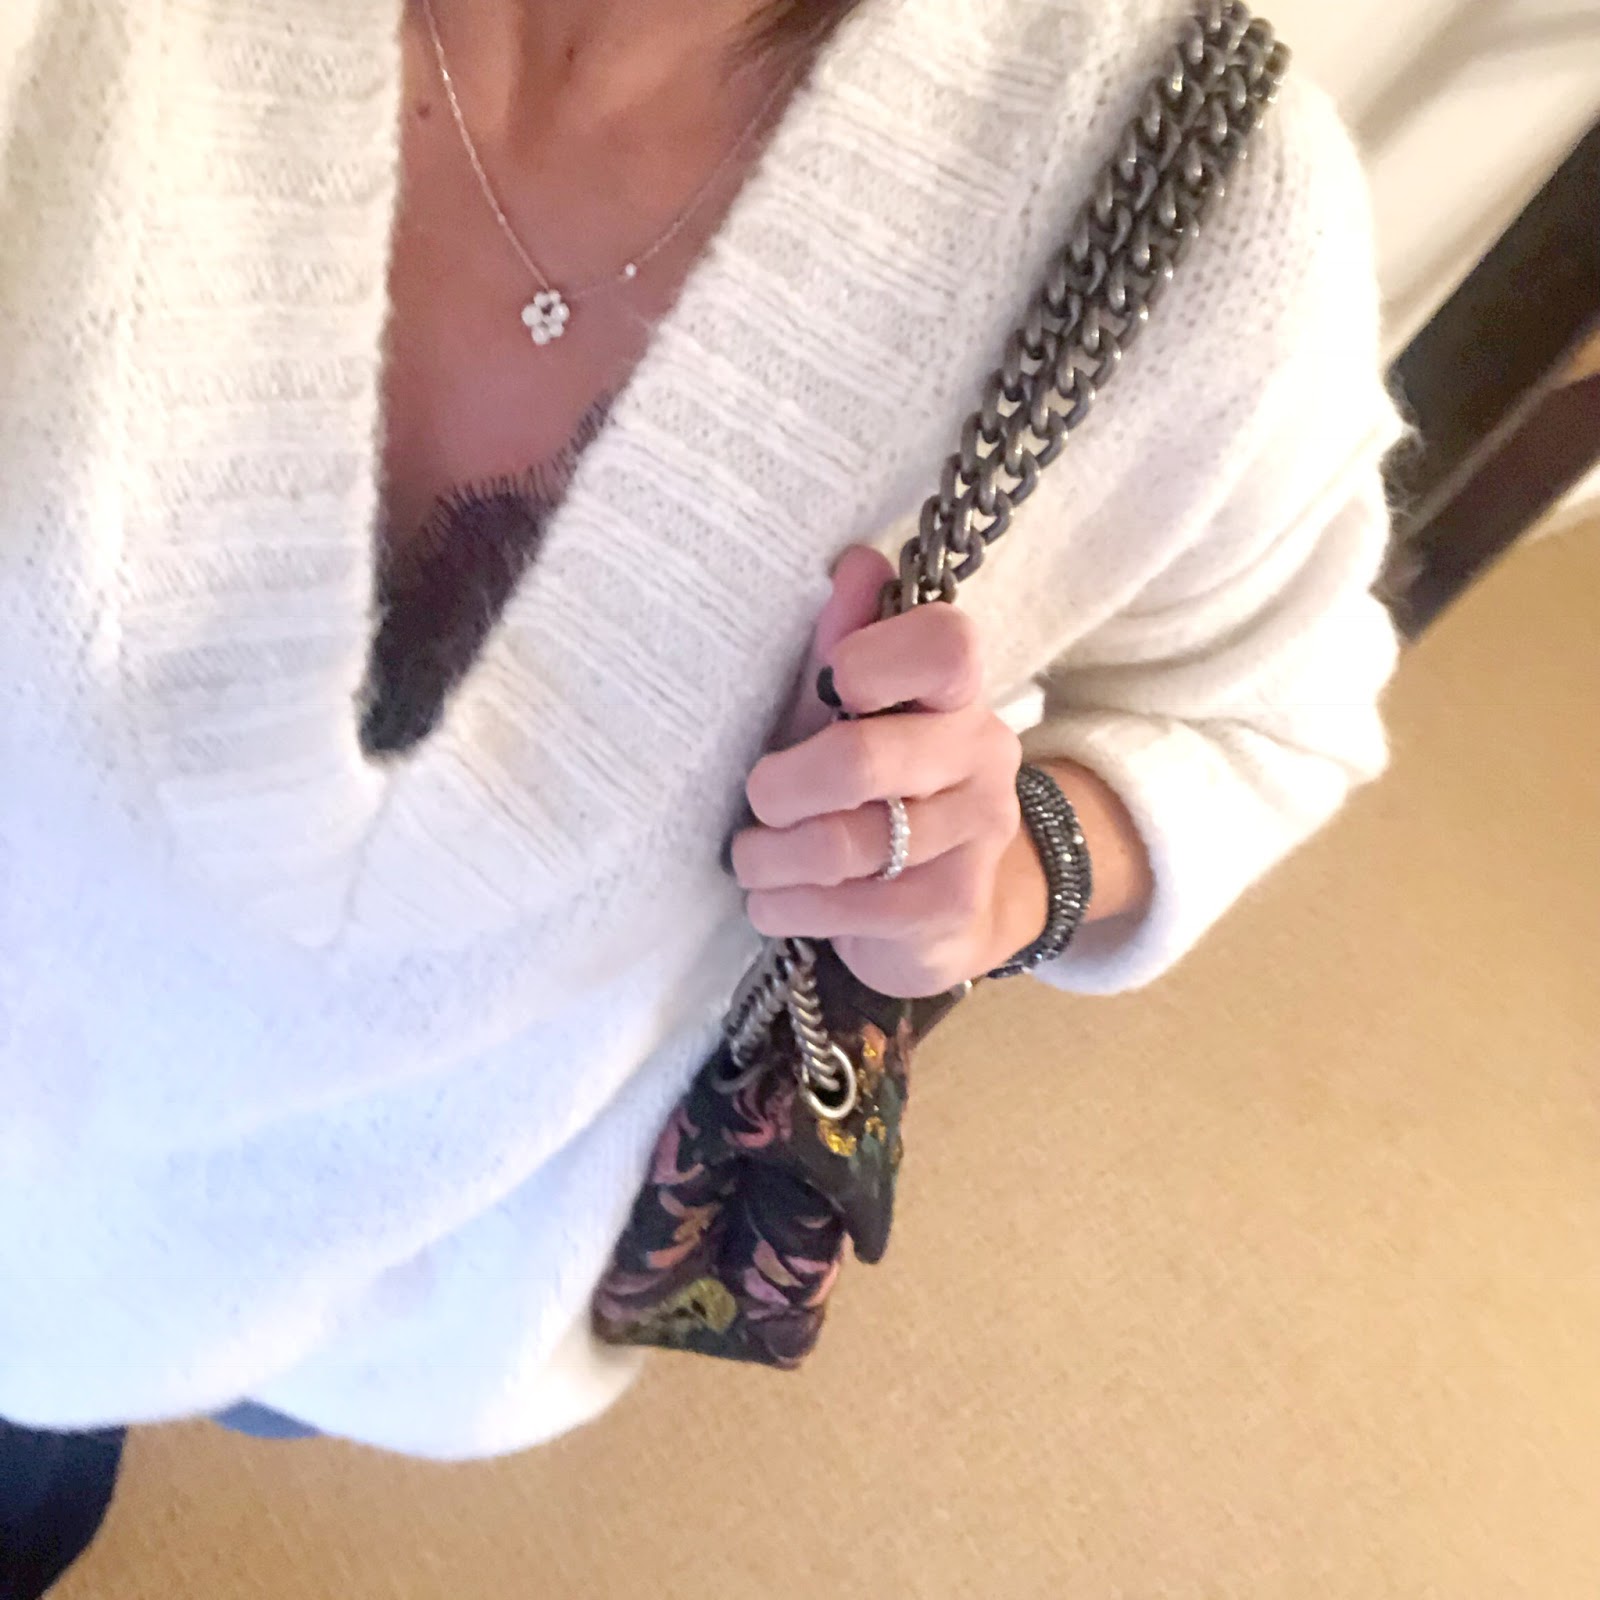 my midlife fashion, zara oversized sweater with seam details, massimo dutti lace trim camisole, kurt geiger kensington fabric bag, j crew cropped kick flare jeans, marks and spencer side zip stiletto heel ankle boots